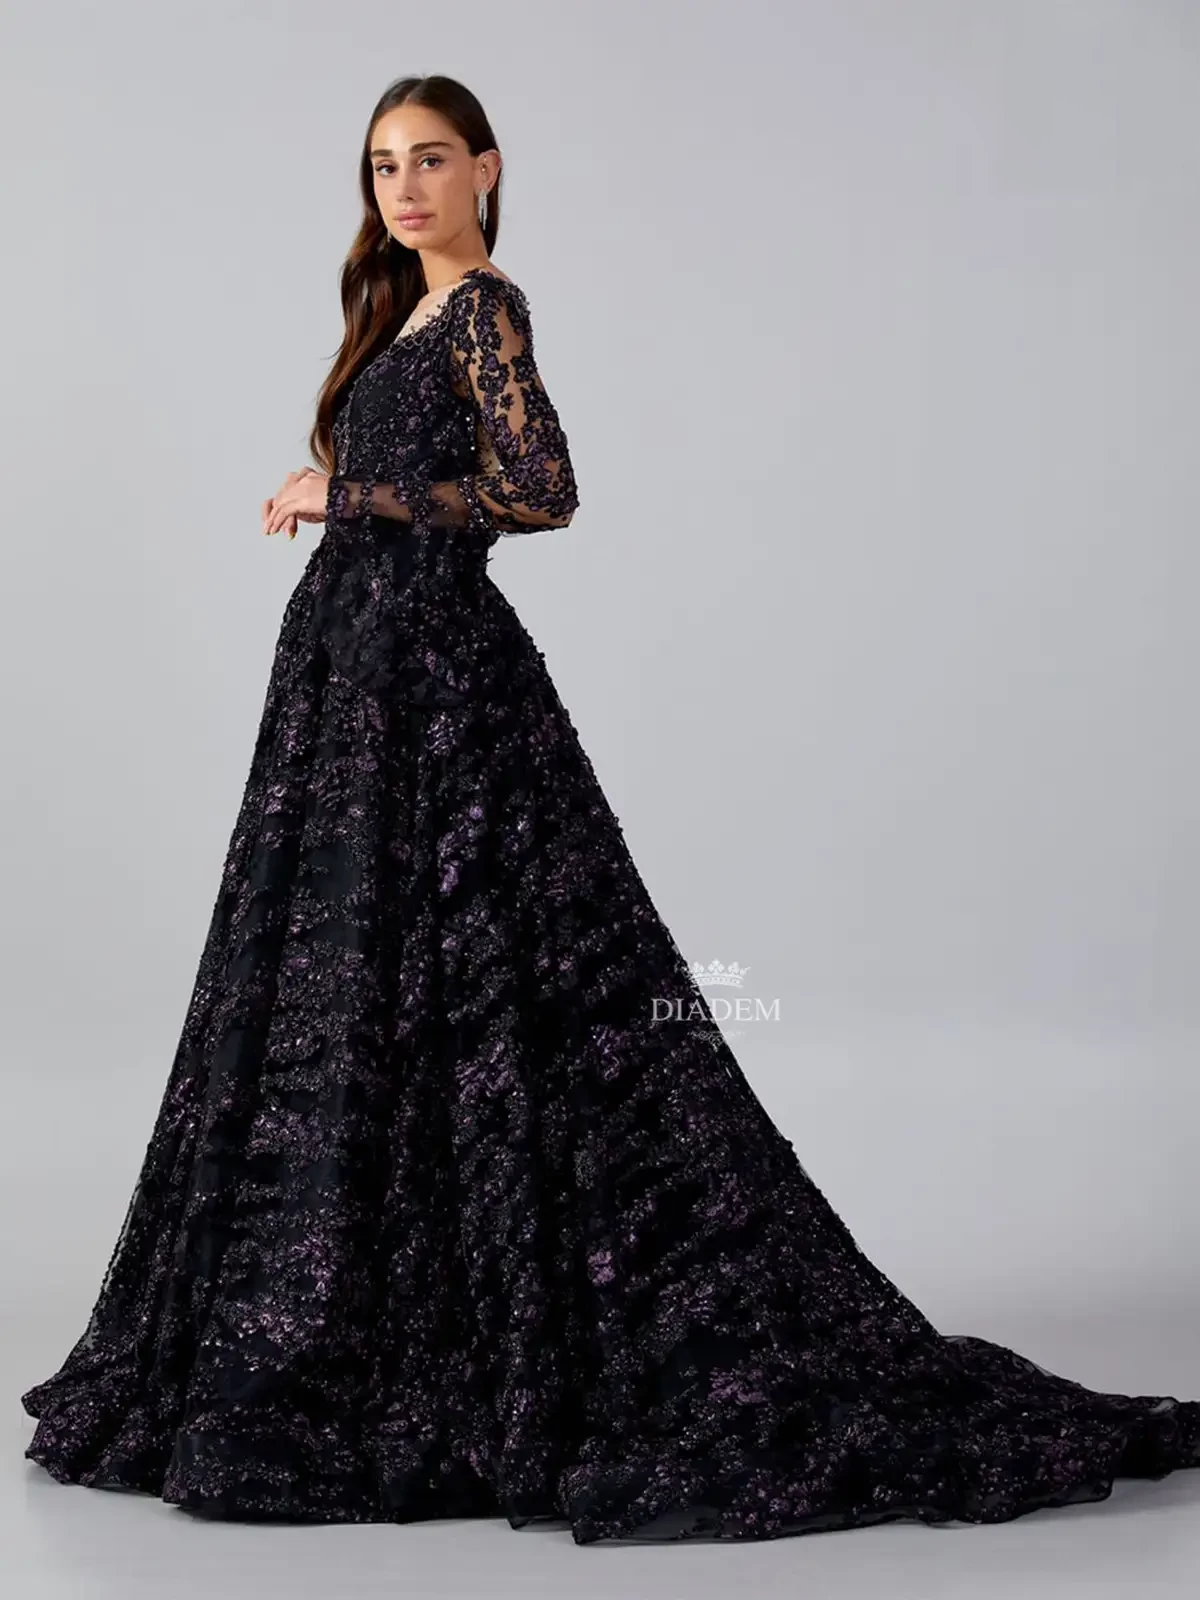 Black Gown Embellished With Laces And Beads In Floral Designs